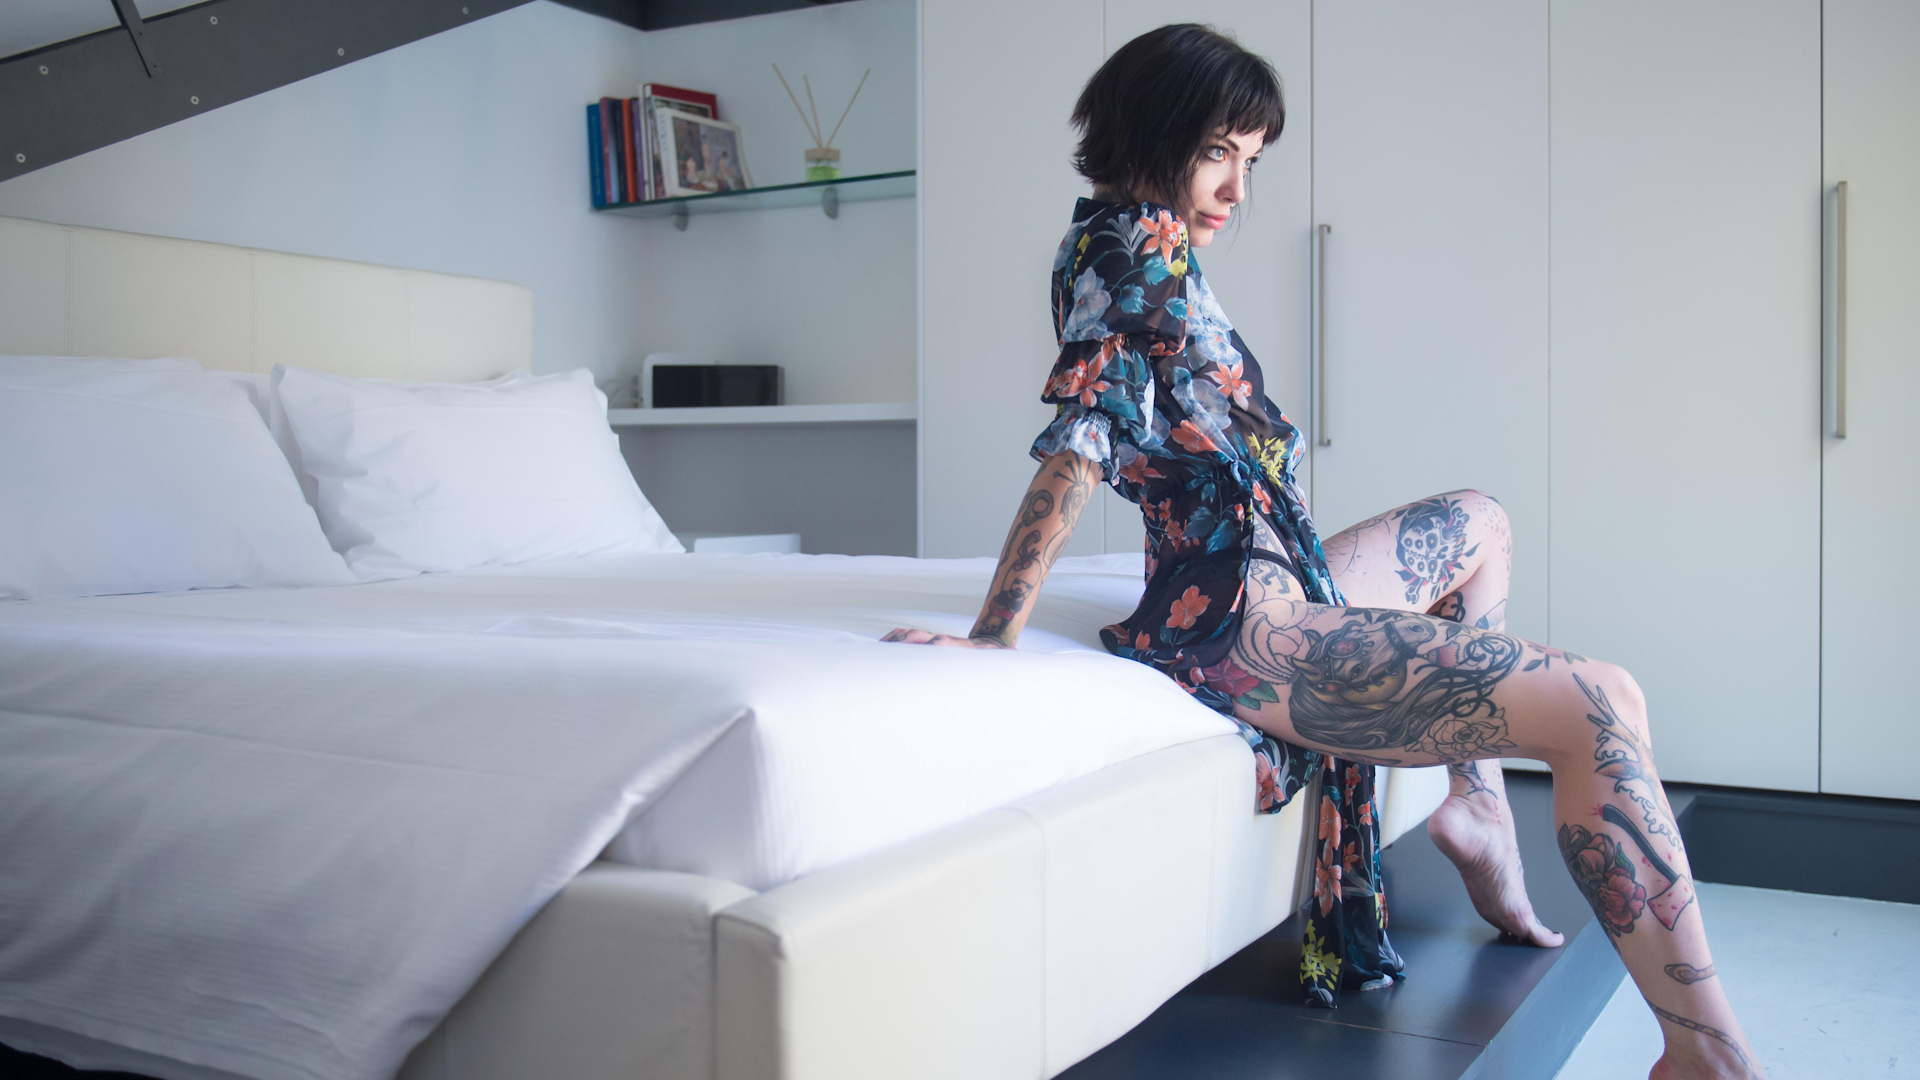 People 1920x1080 Refen suicide tattoo brunette blue eyes inked girls Suicide Girls sitting short hair profile in bed pointed toes women see-through clothing